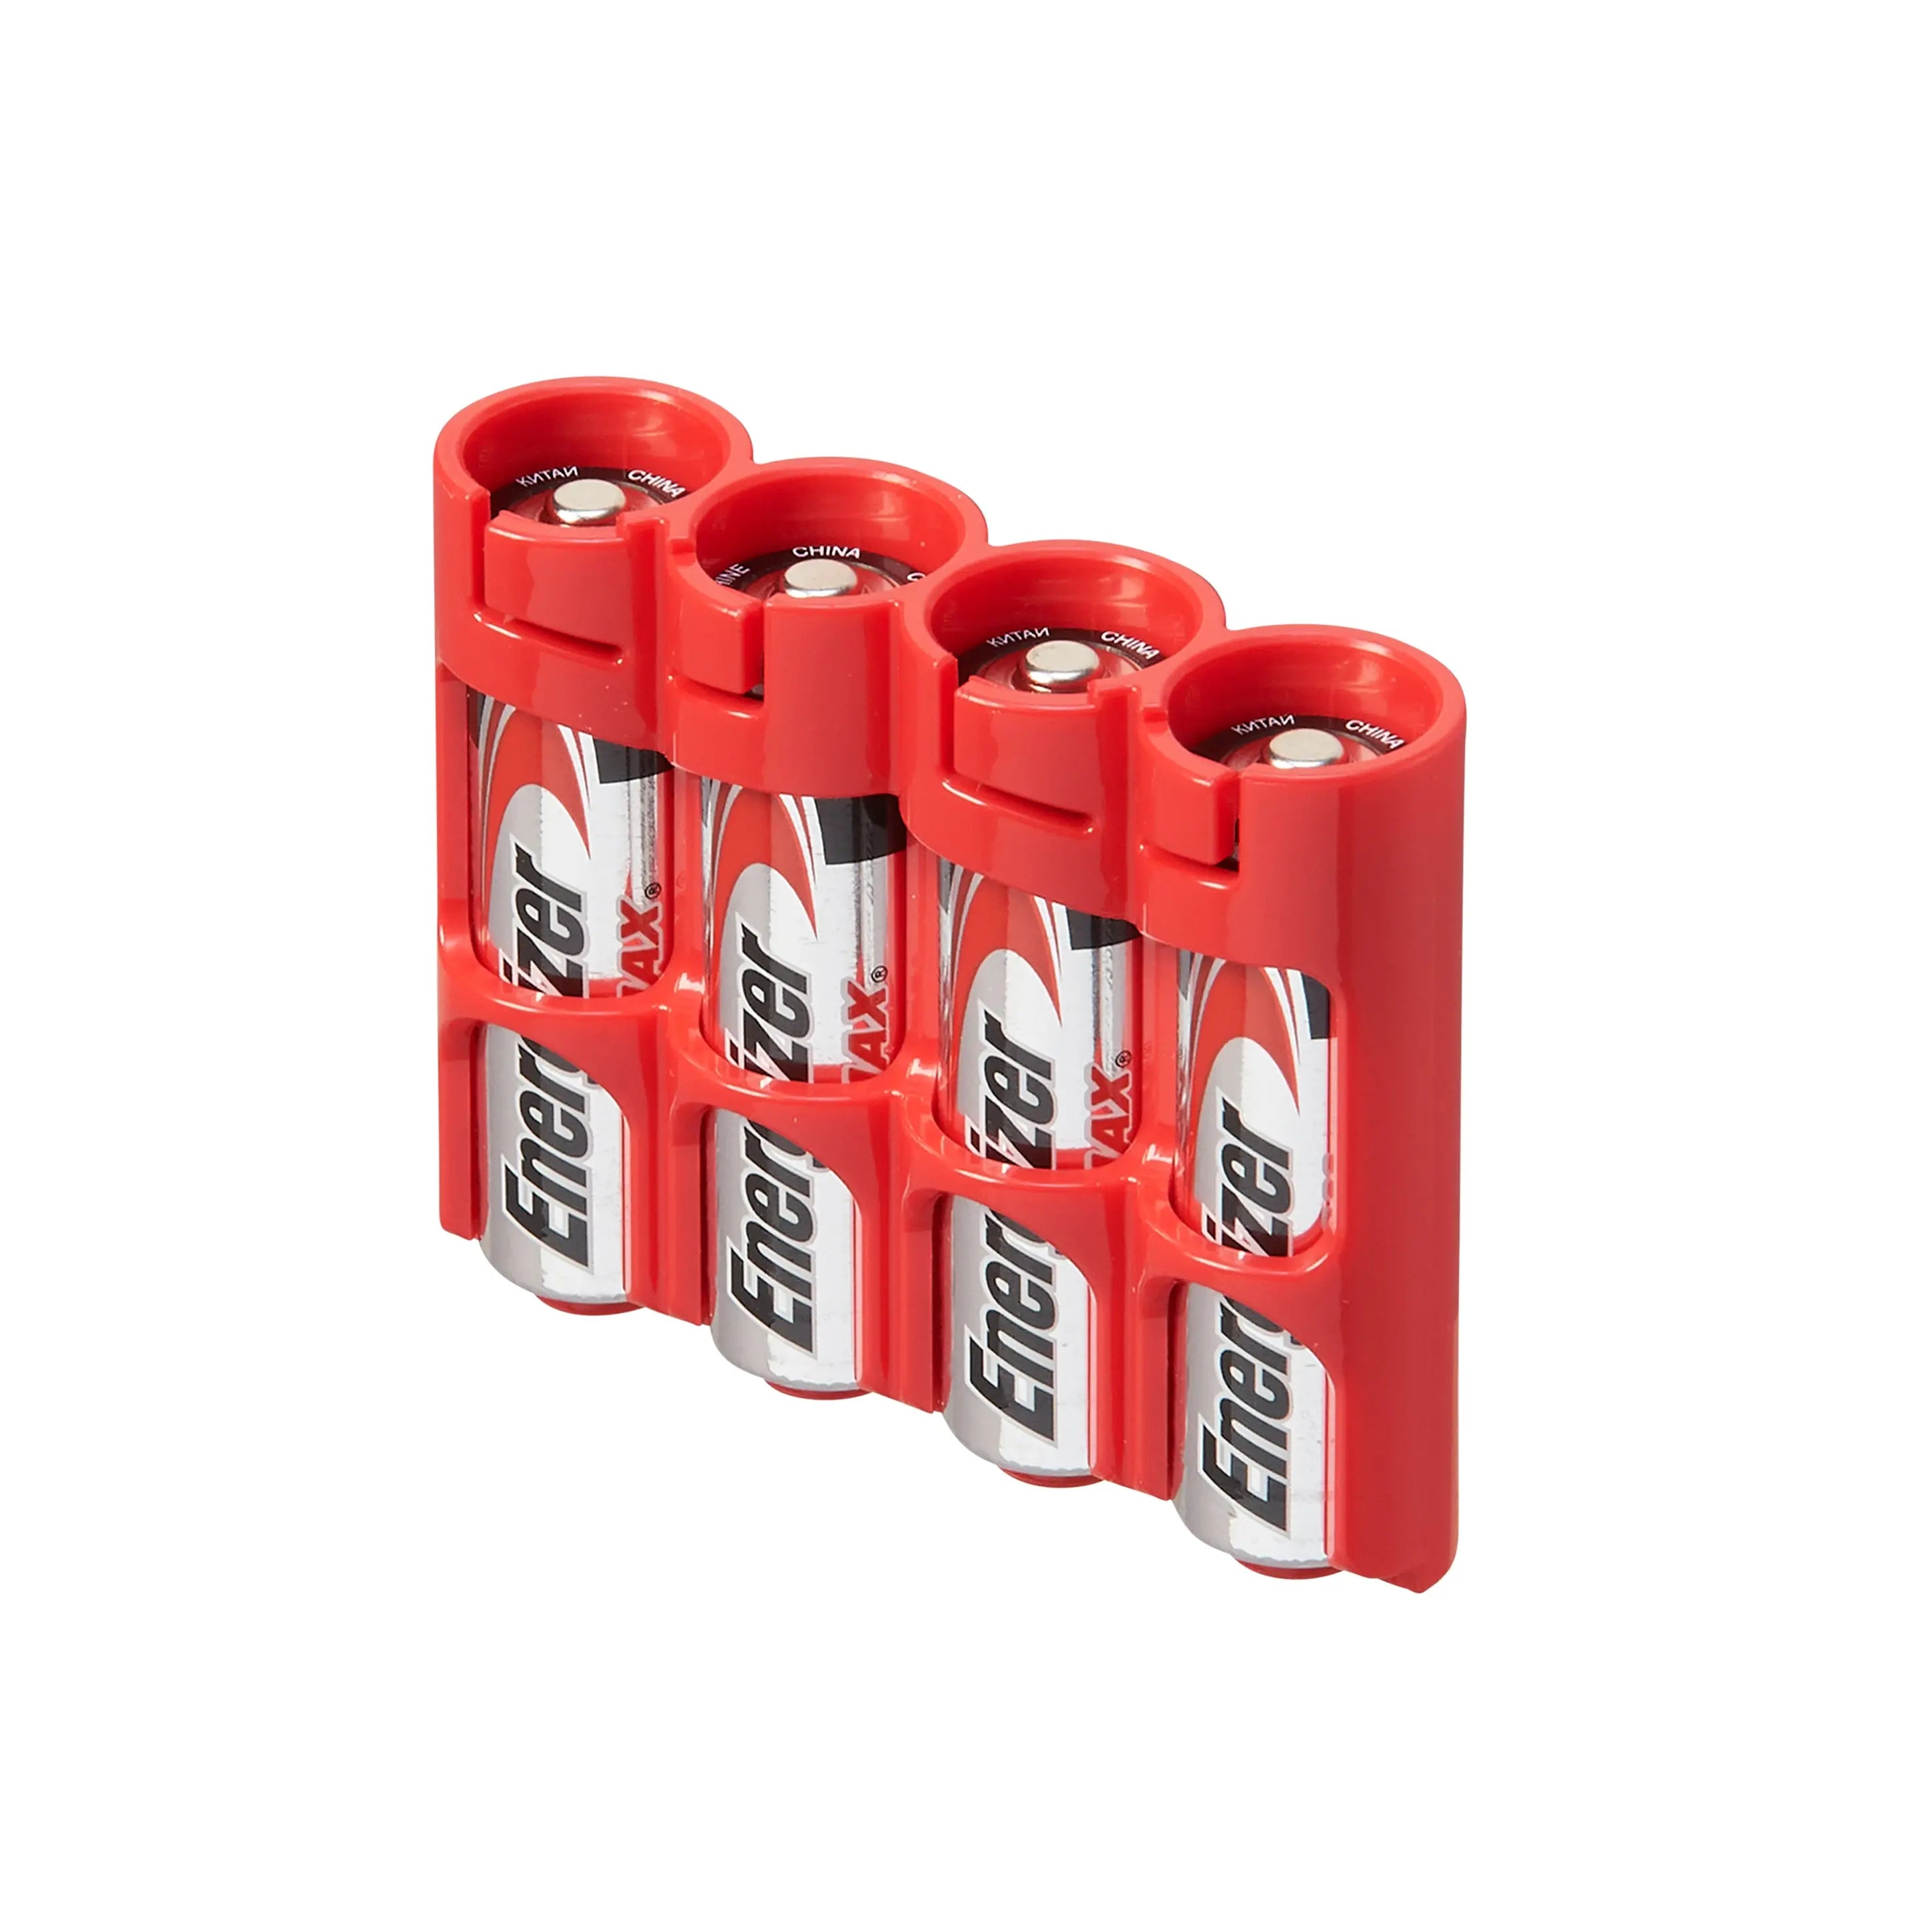 Slim Line AA 4 Pack (Red) Storacell